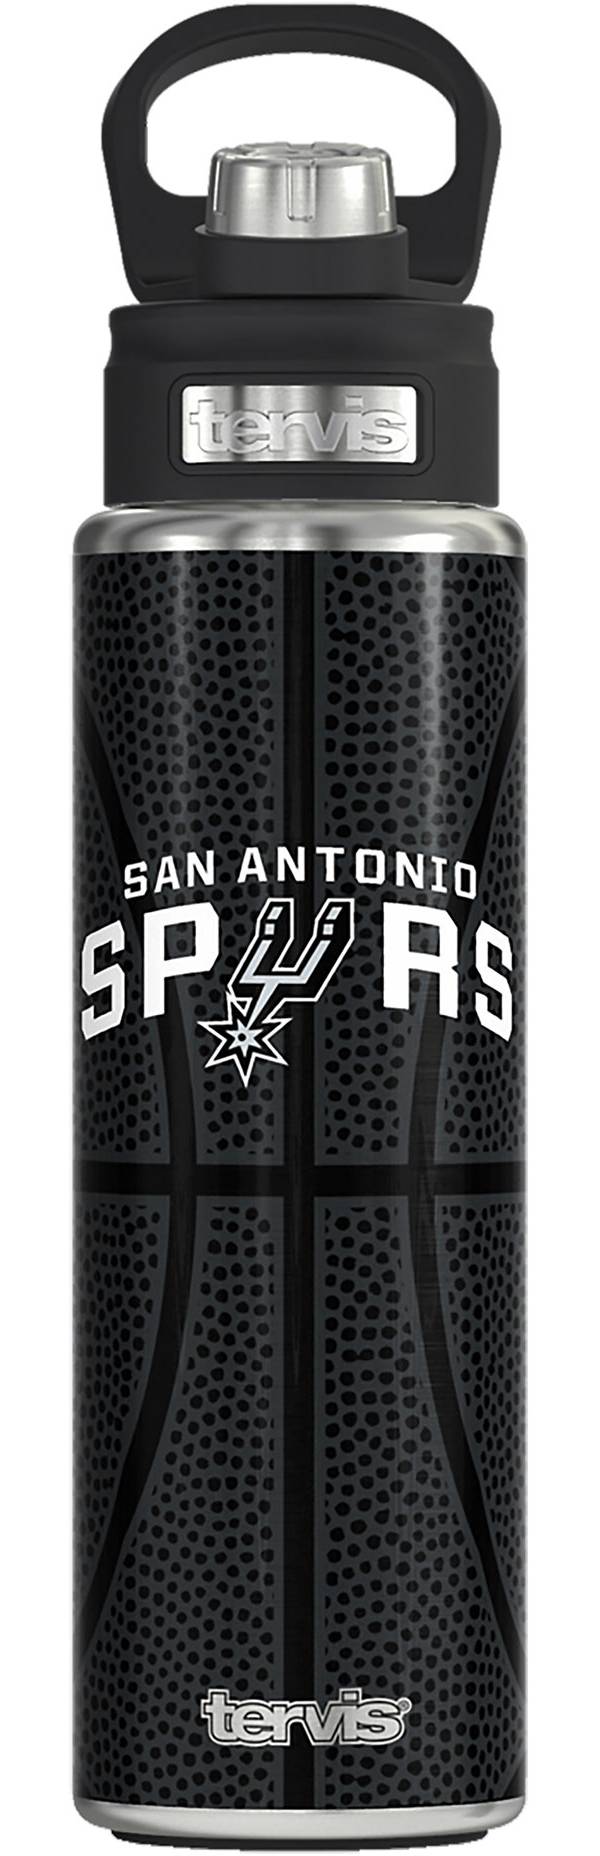 Tervis San Antonio Spurs 24oz. Stainless Steel Water Bottle product image